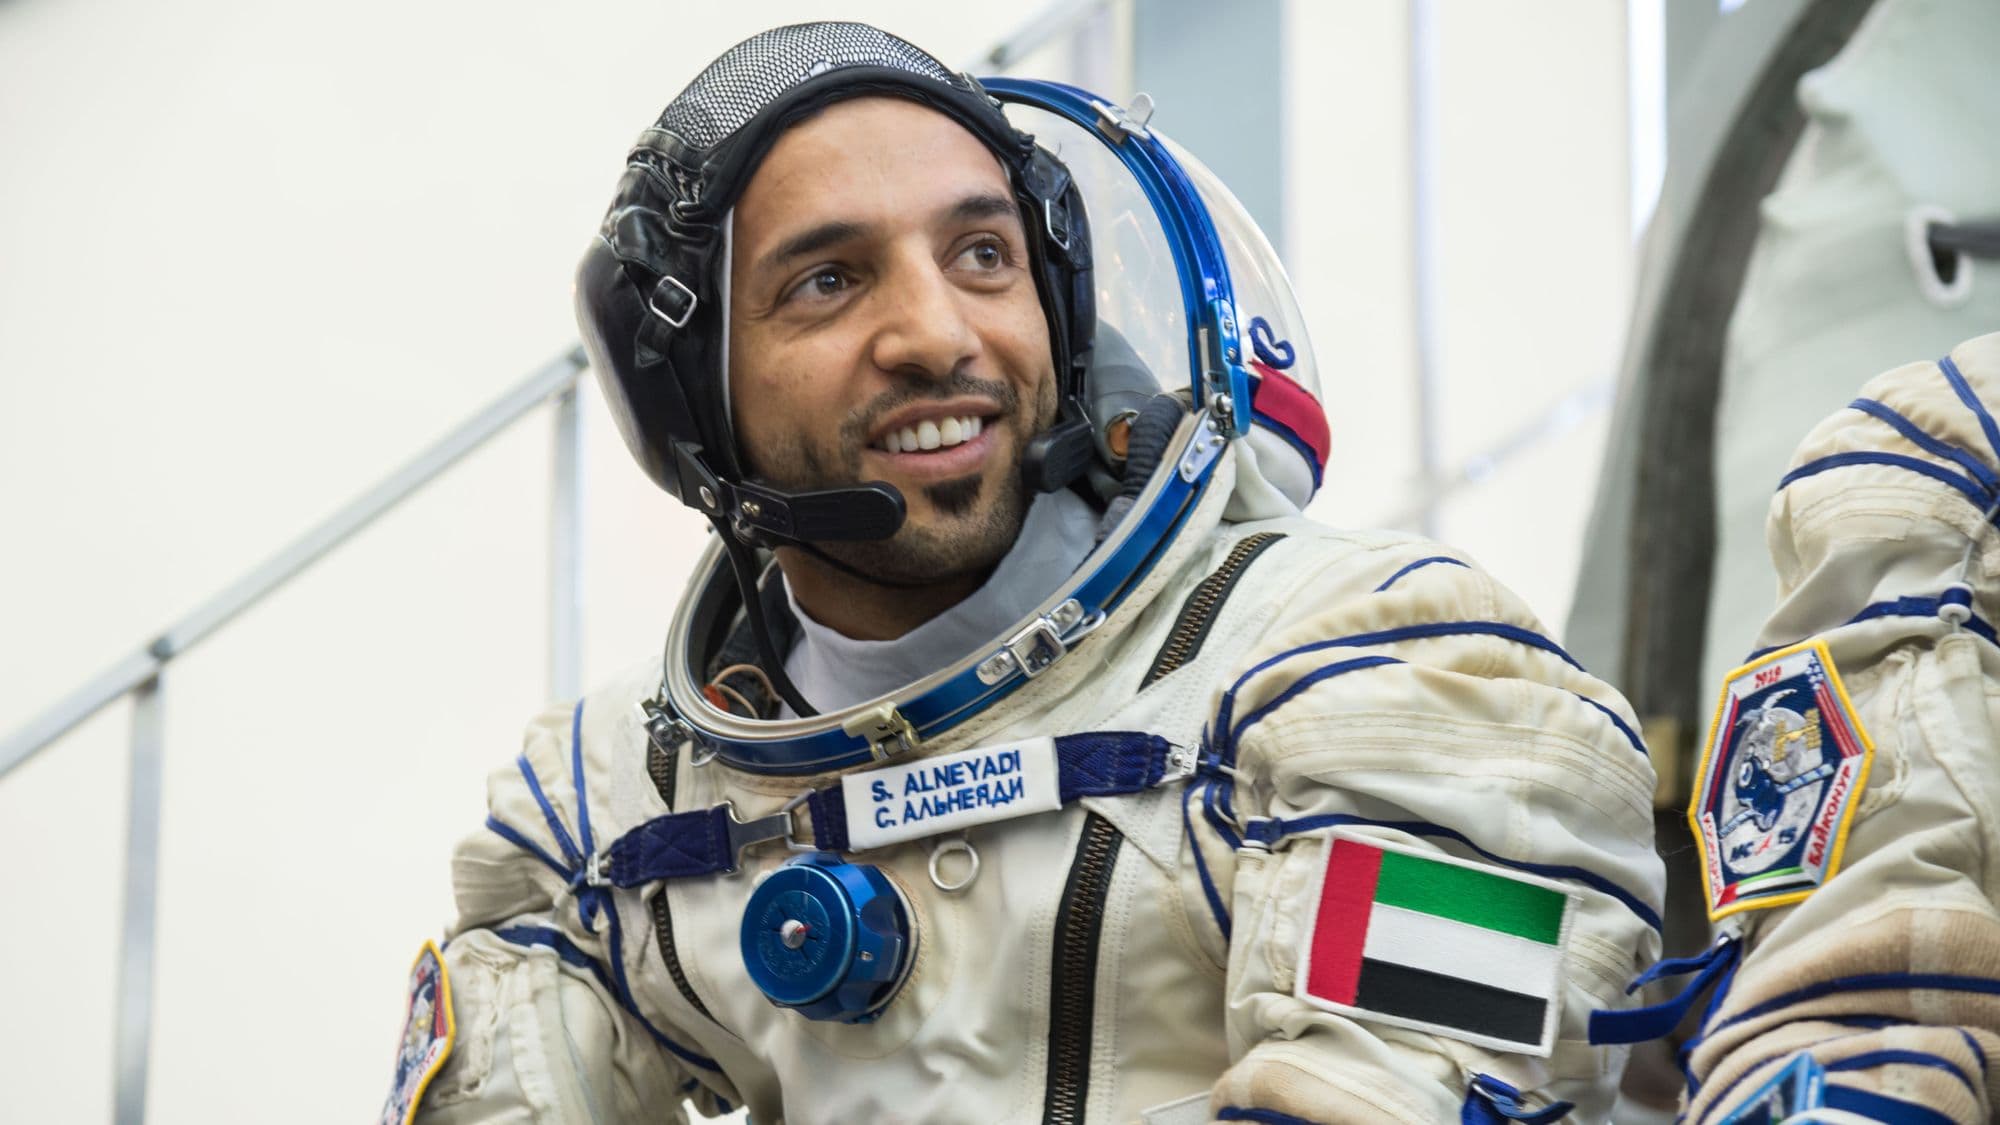 The First Emirati Astronaut to Join a Six-Month Mission to the ISS